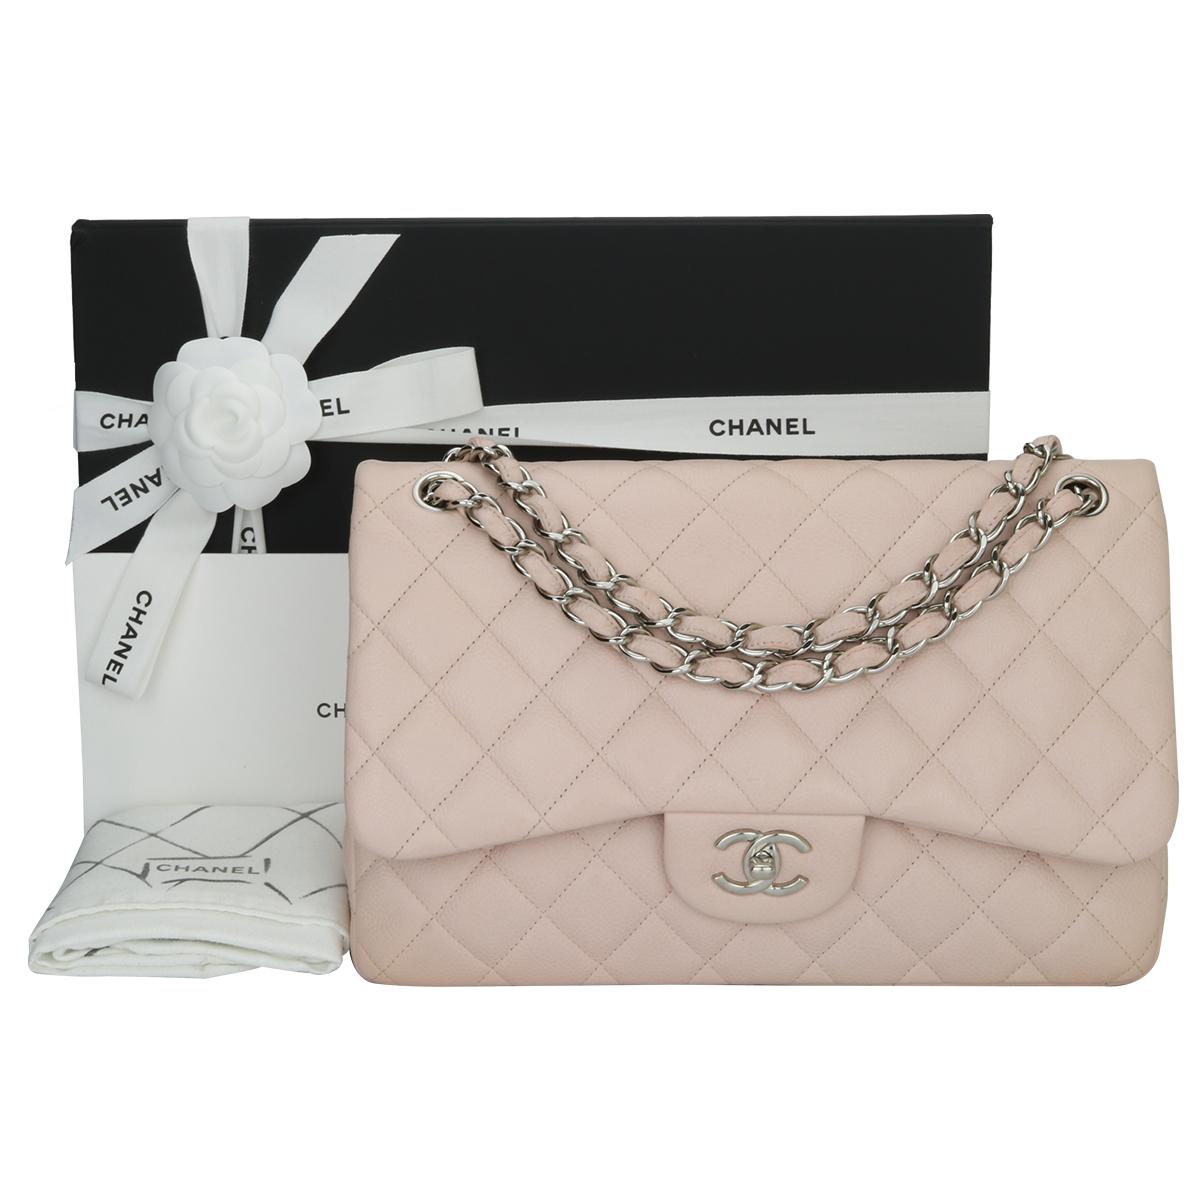 Authentic CHANEL Classic Double Flap Jumbo Bag Baby Pink Caviar with Silver Hardware 2014.

This stunning bag is in excellent condition, the bag still holds its original shape, and the hardware is still very shiny.

Exterior Condition: Excellent